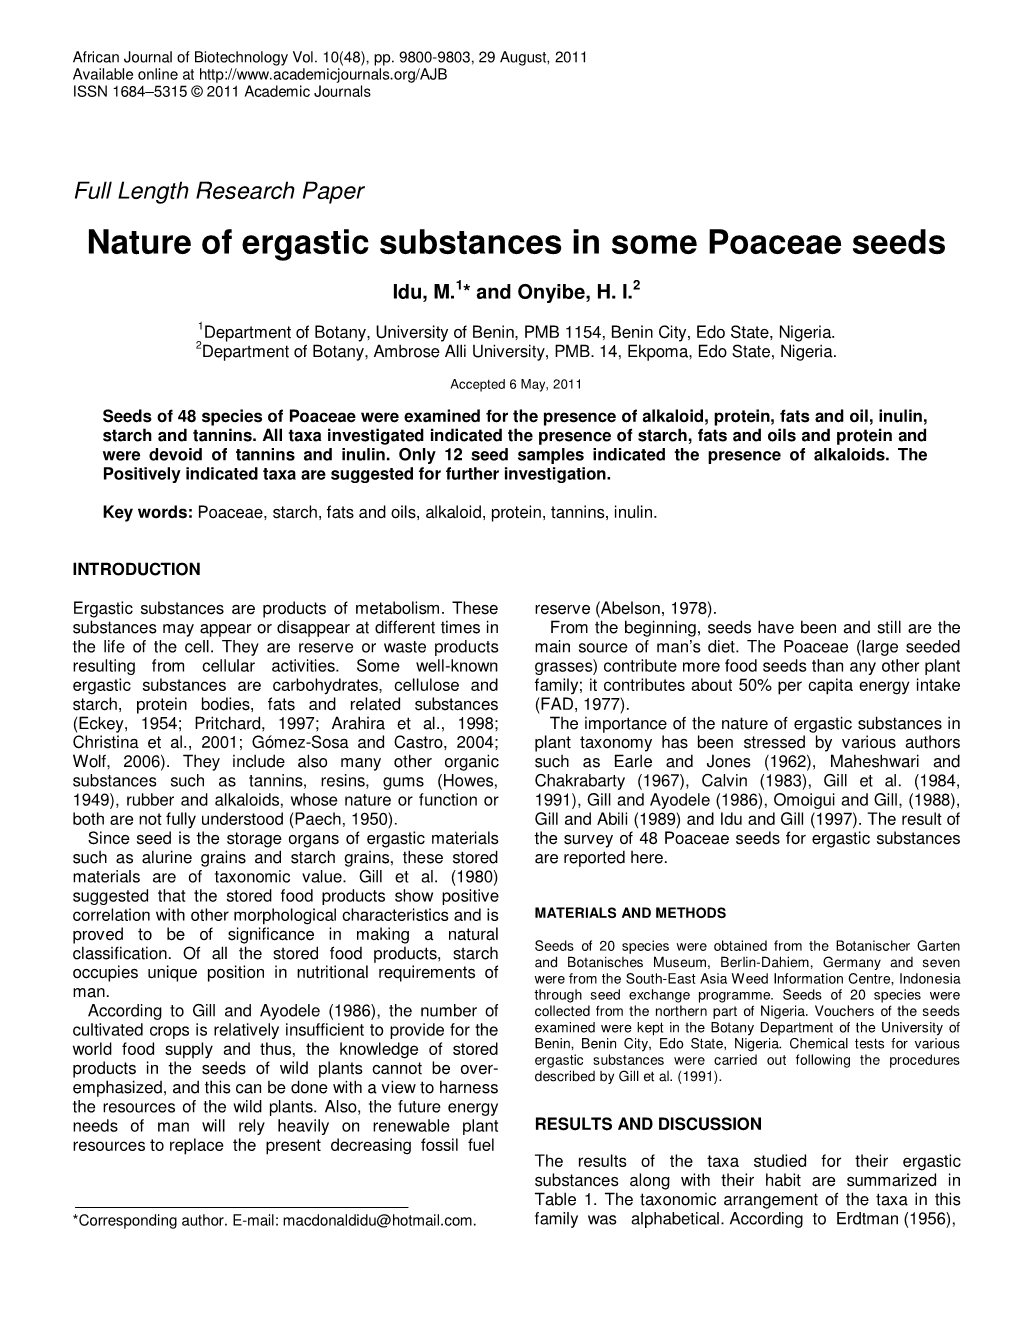 Nature of Ergastic Substances in Some Poaceae Seeds